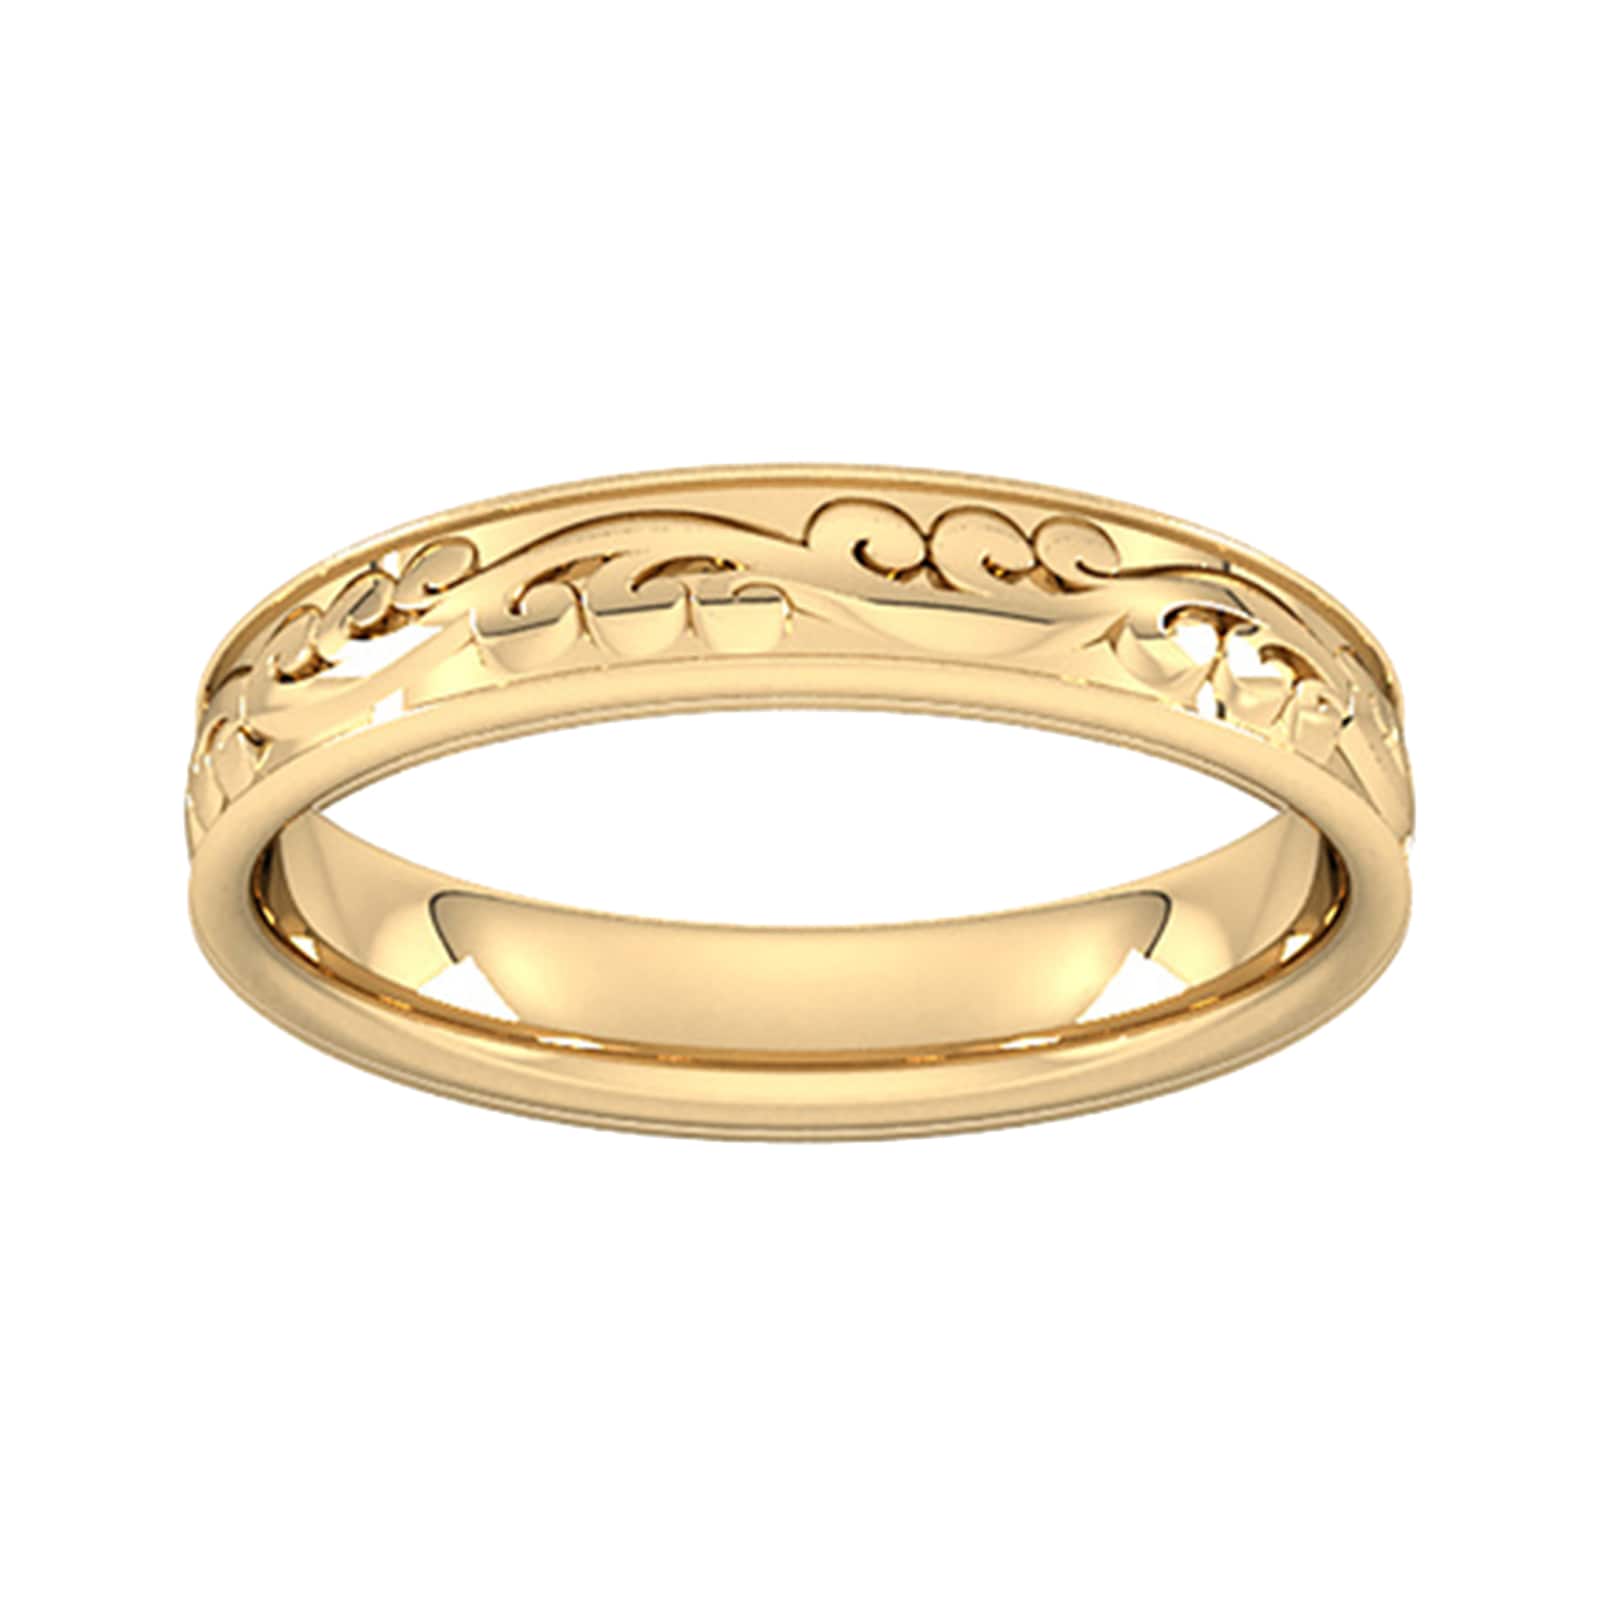 4mm Hand Engraved Wedding Ring In 18 Carat Yellow Gold - Ring Size R